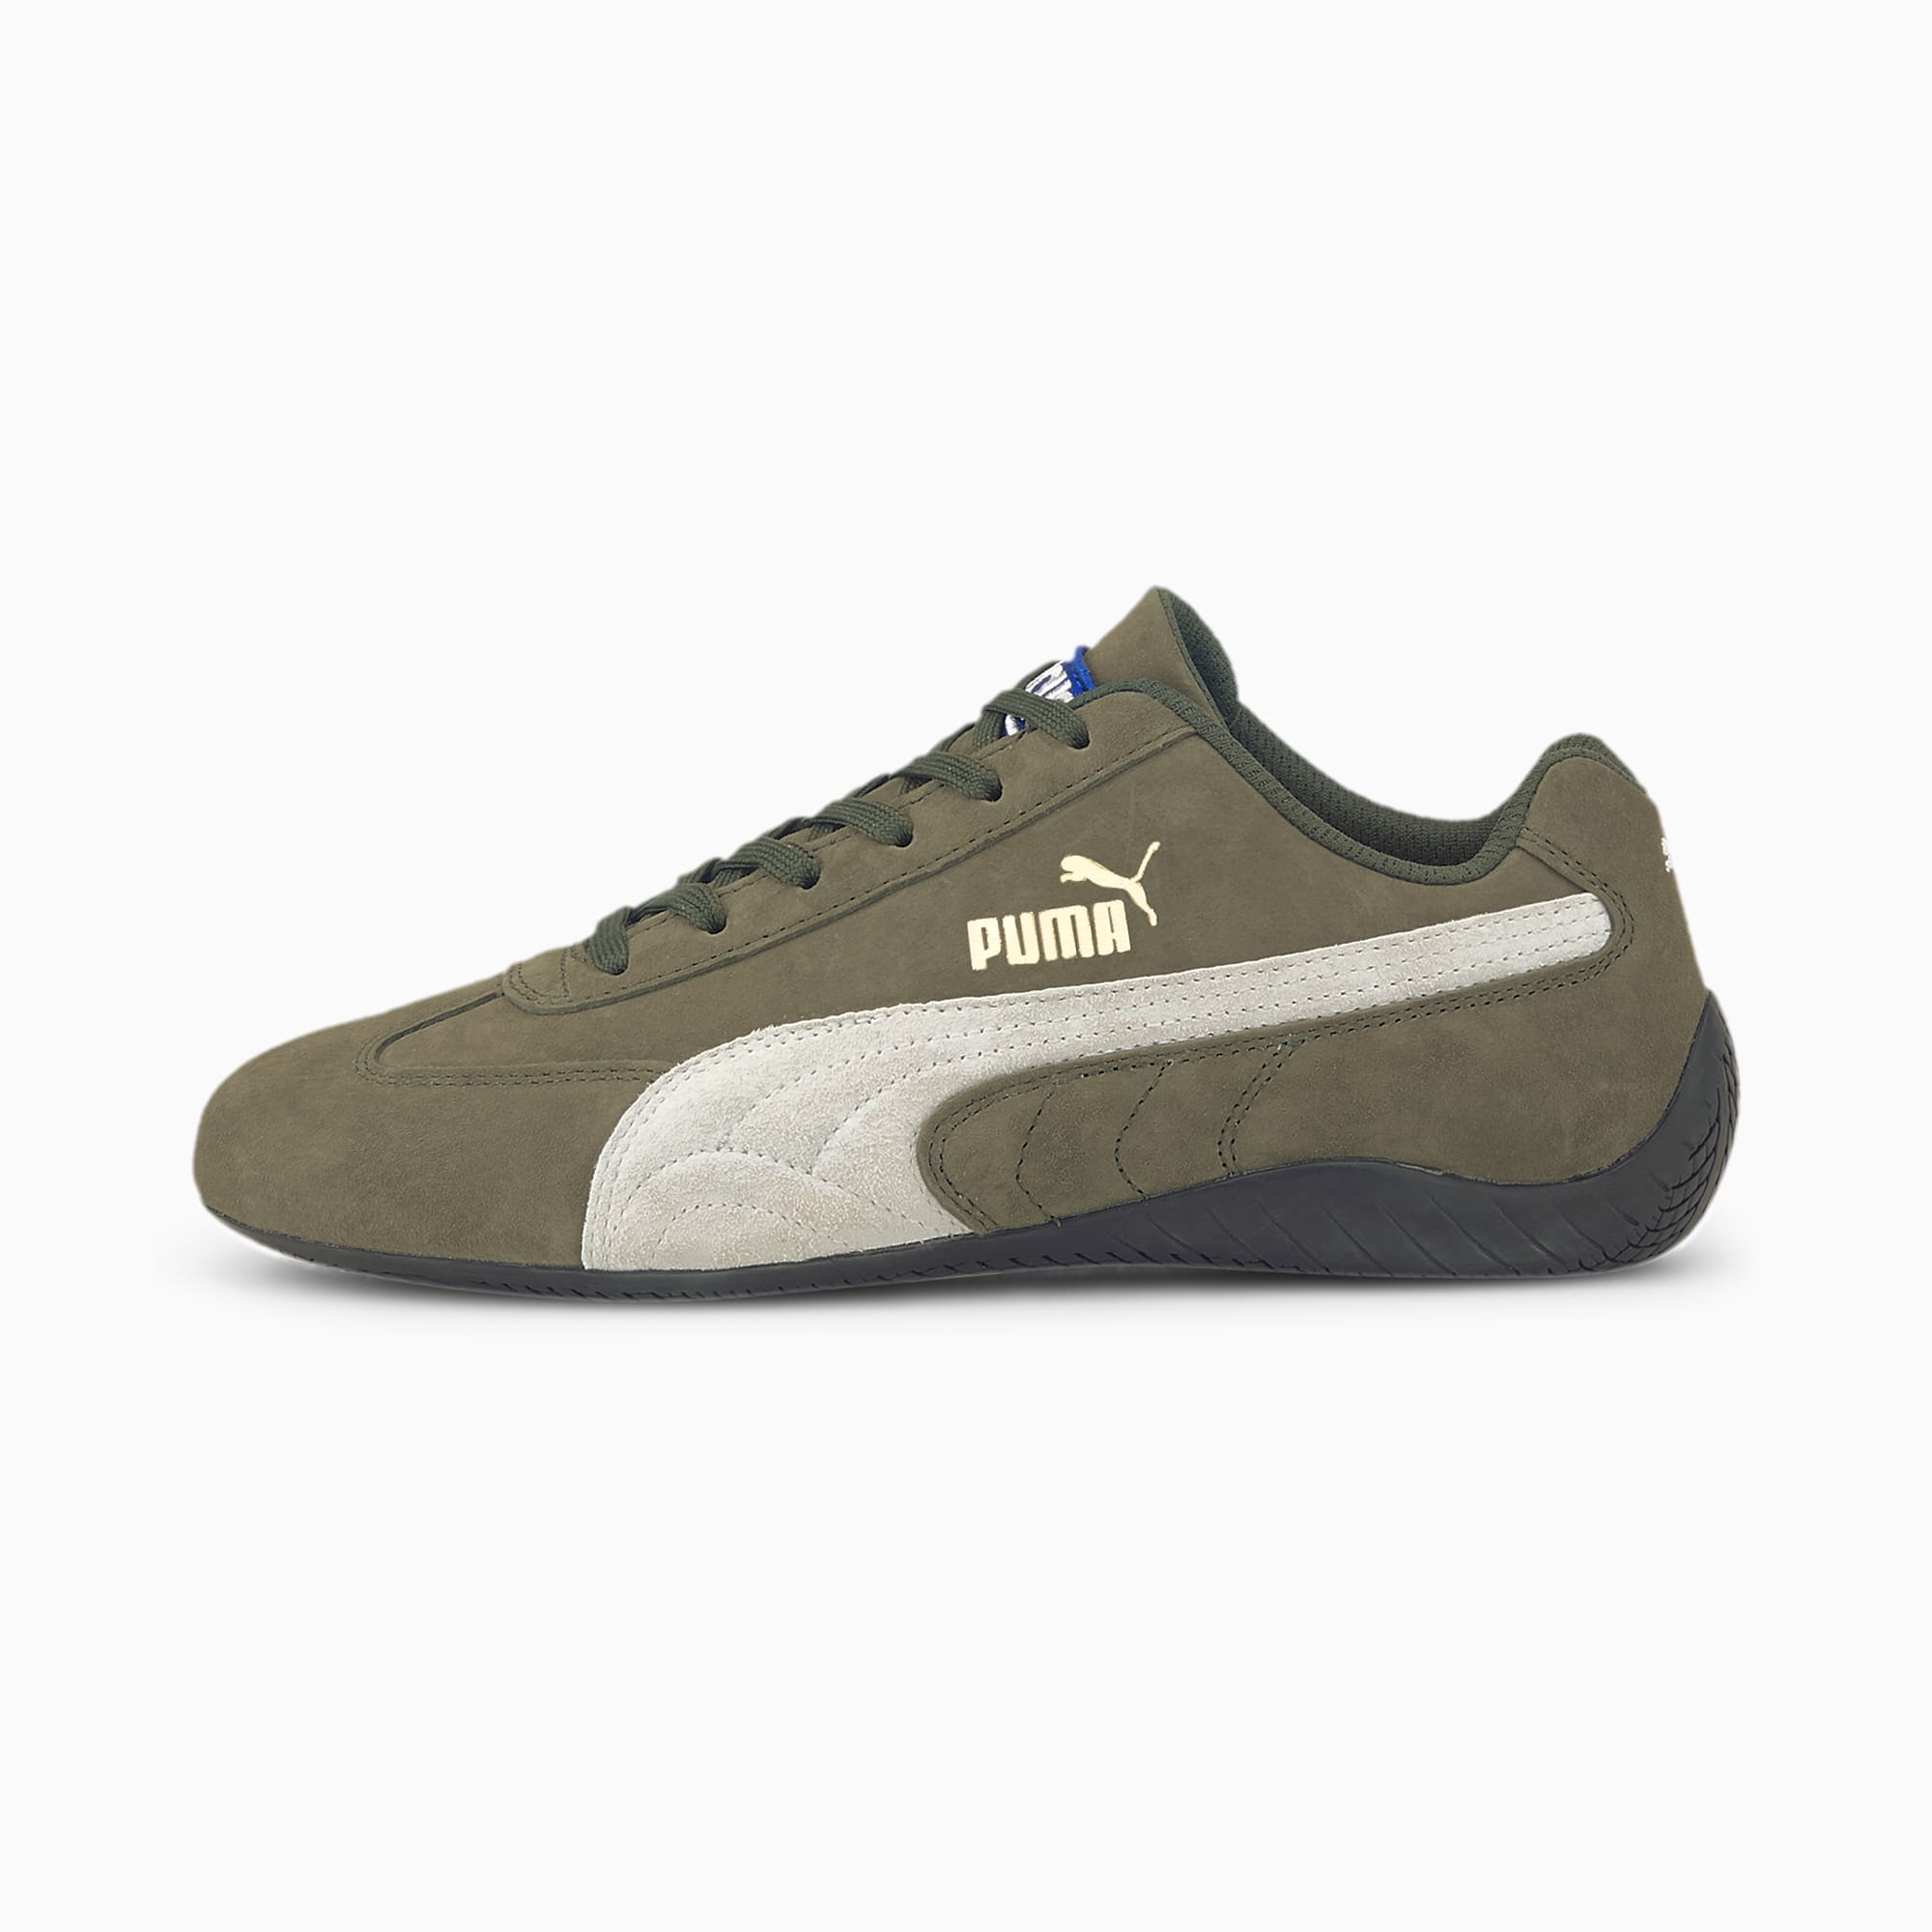 puma speed cat sparco shoes